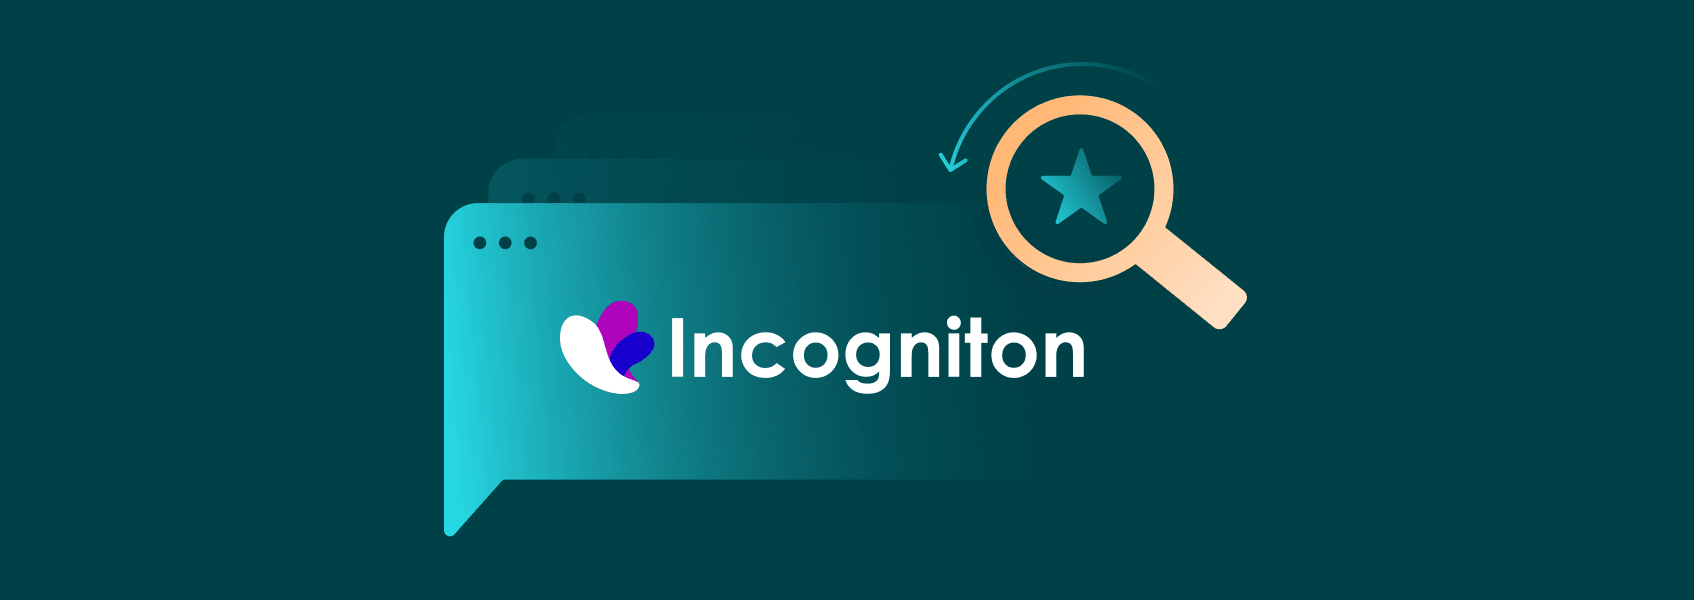 Browsing Without Traces: Incogniton Browser Review